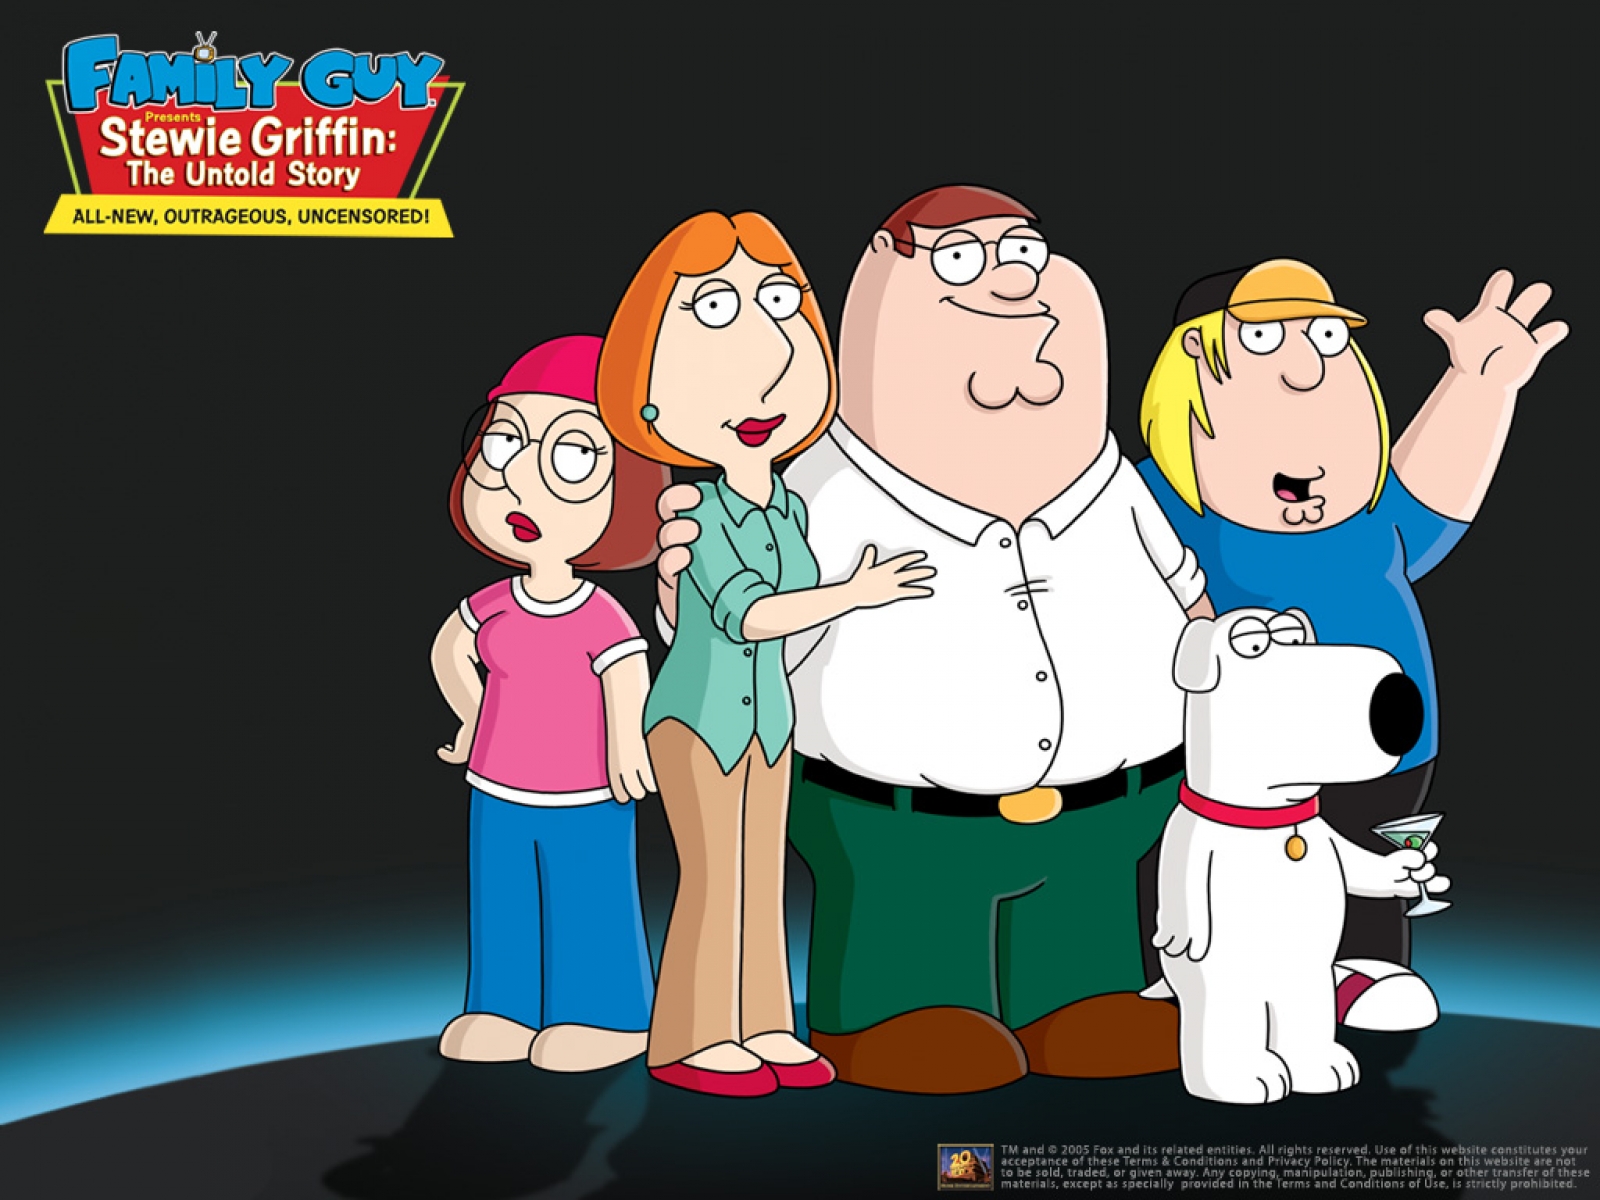 chris griffin, peter griffin, family guy, tv show, brian griffin, lois griffin, meg griffin cellphone